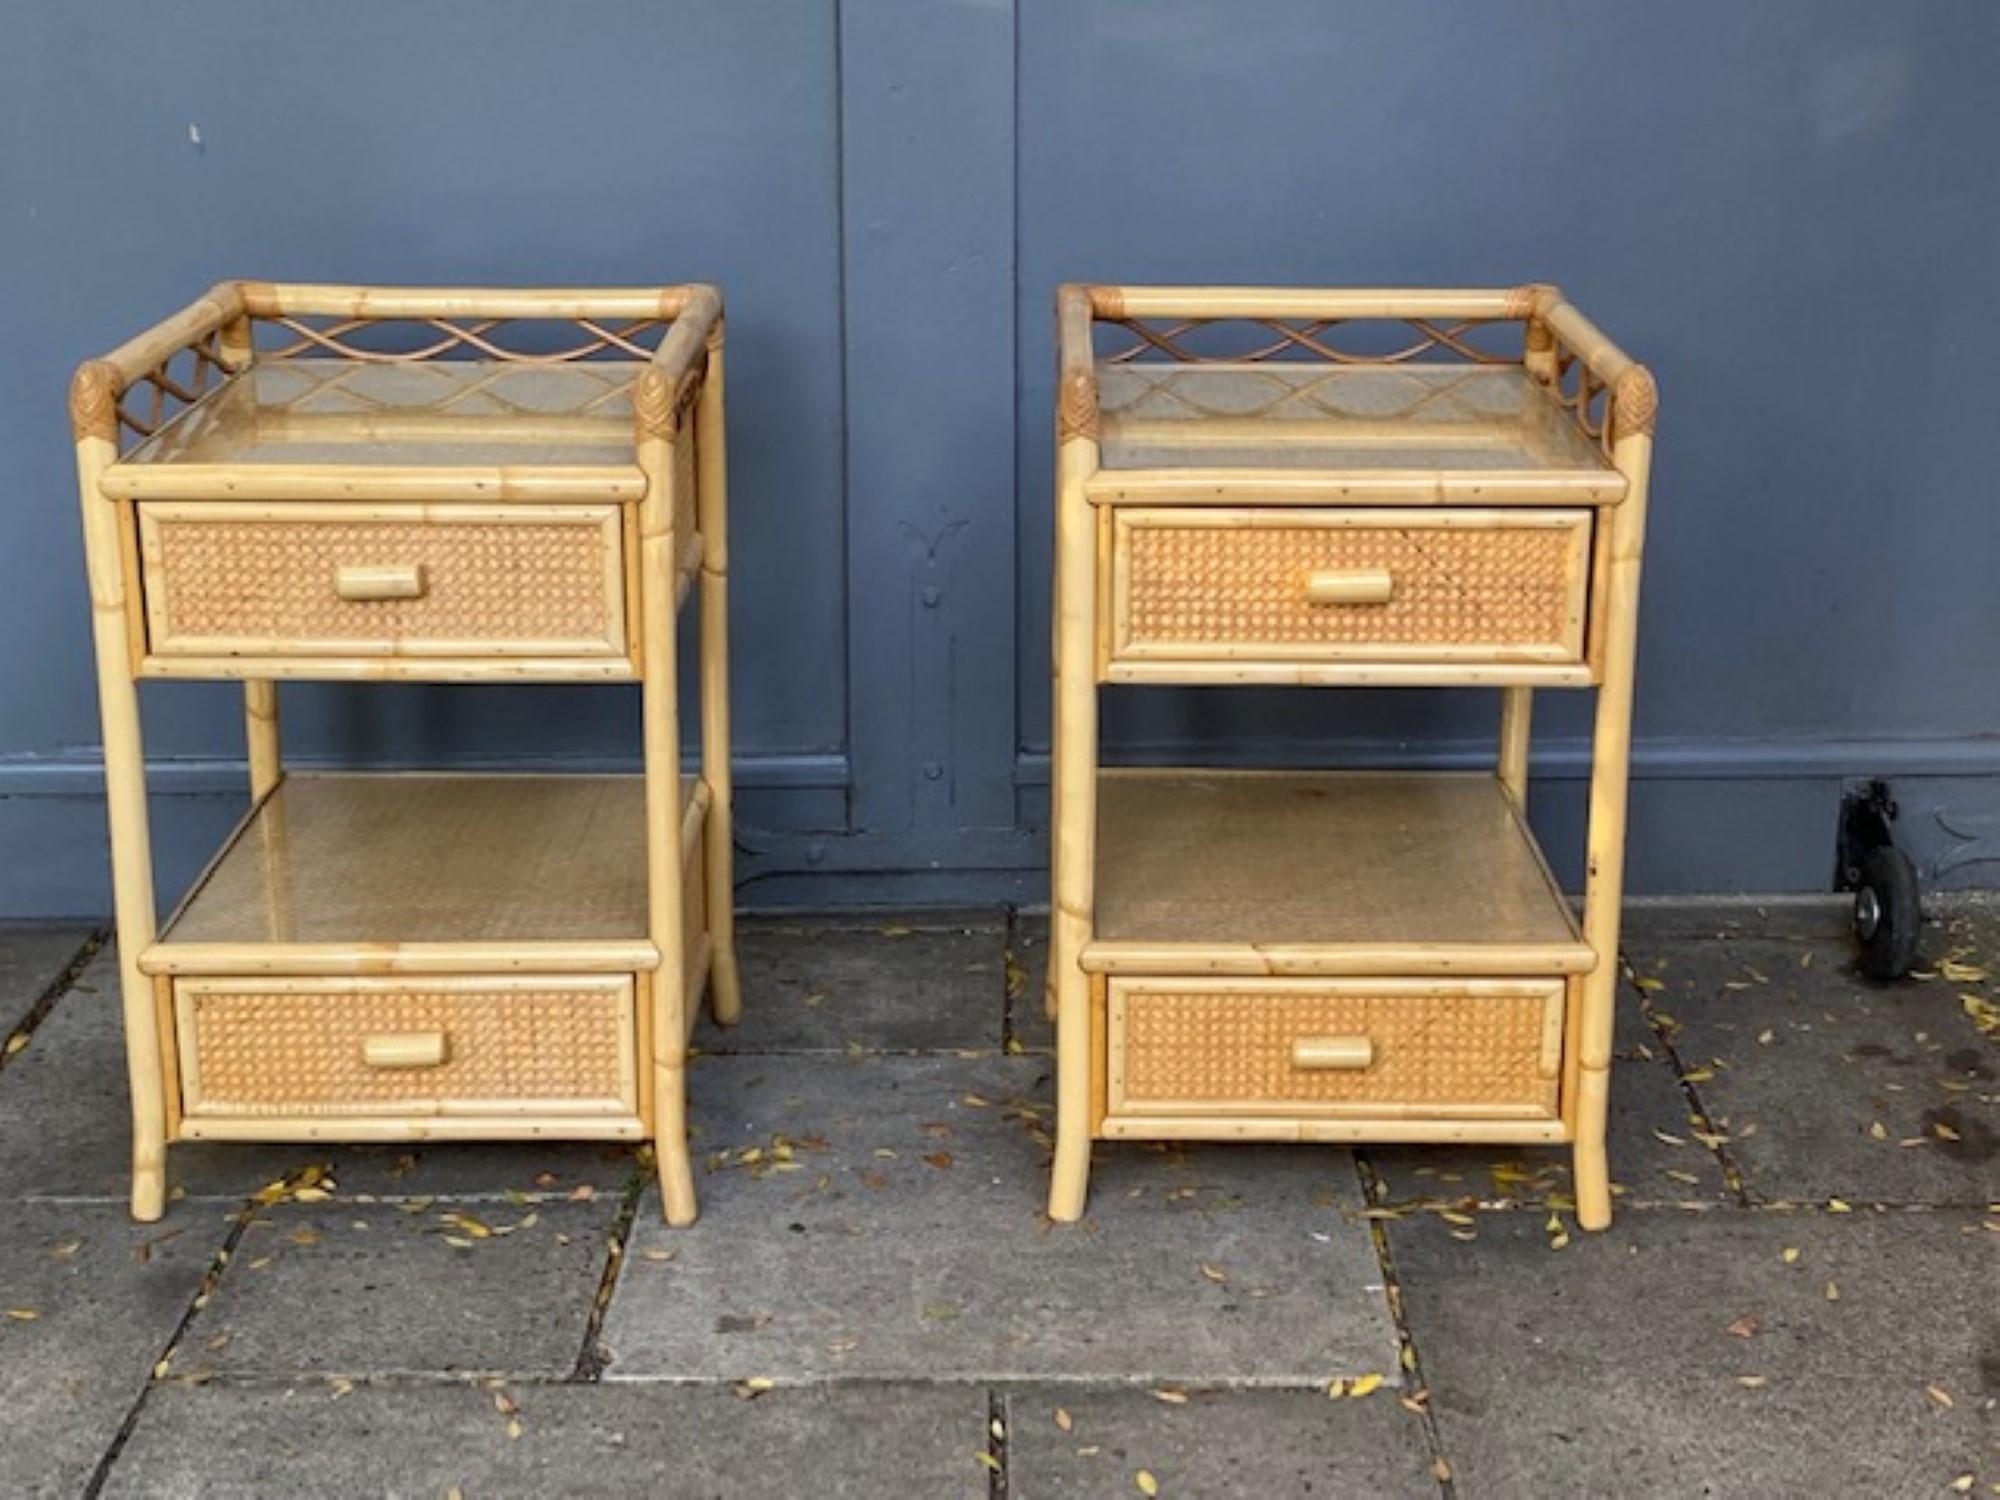 Pair of MCM Rattan / Cane Nightstands / Bedside Tables, Angraves, English, 1970s For Sale 4